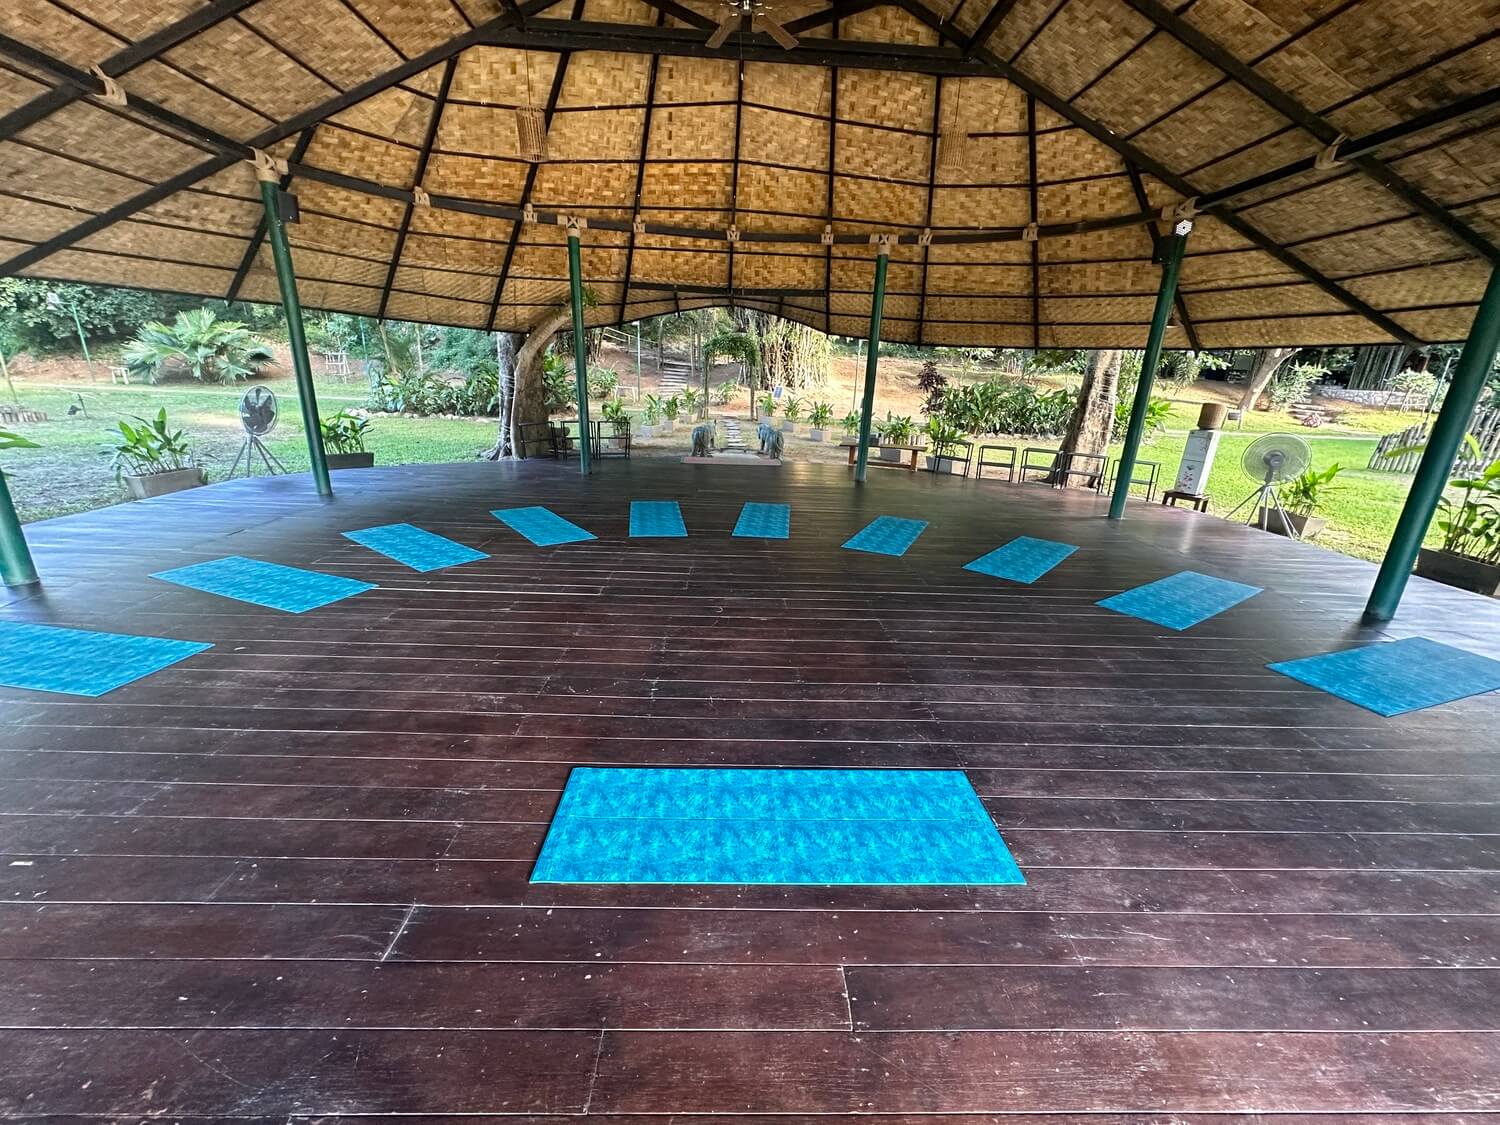 Yoga mats on a wooden floor under a thatched roof in Luang Prabang.